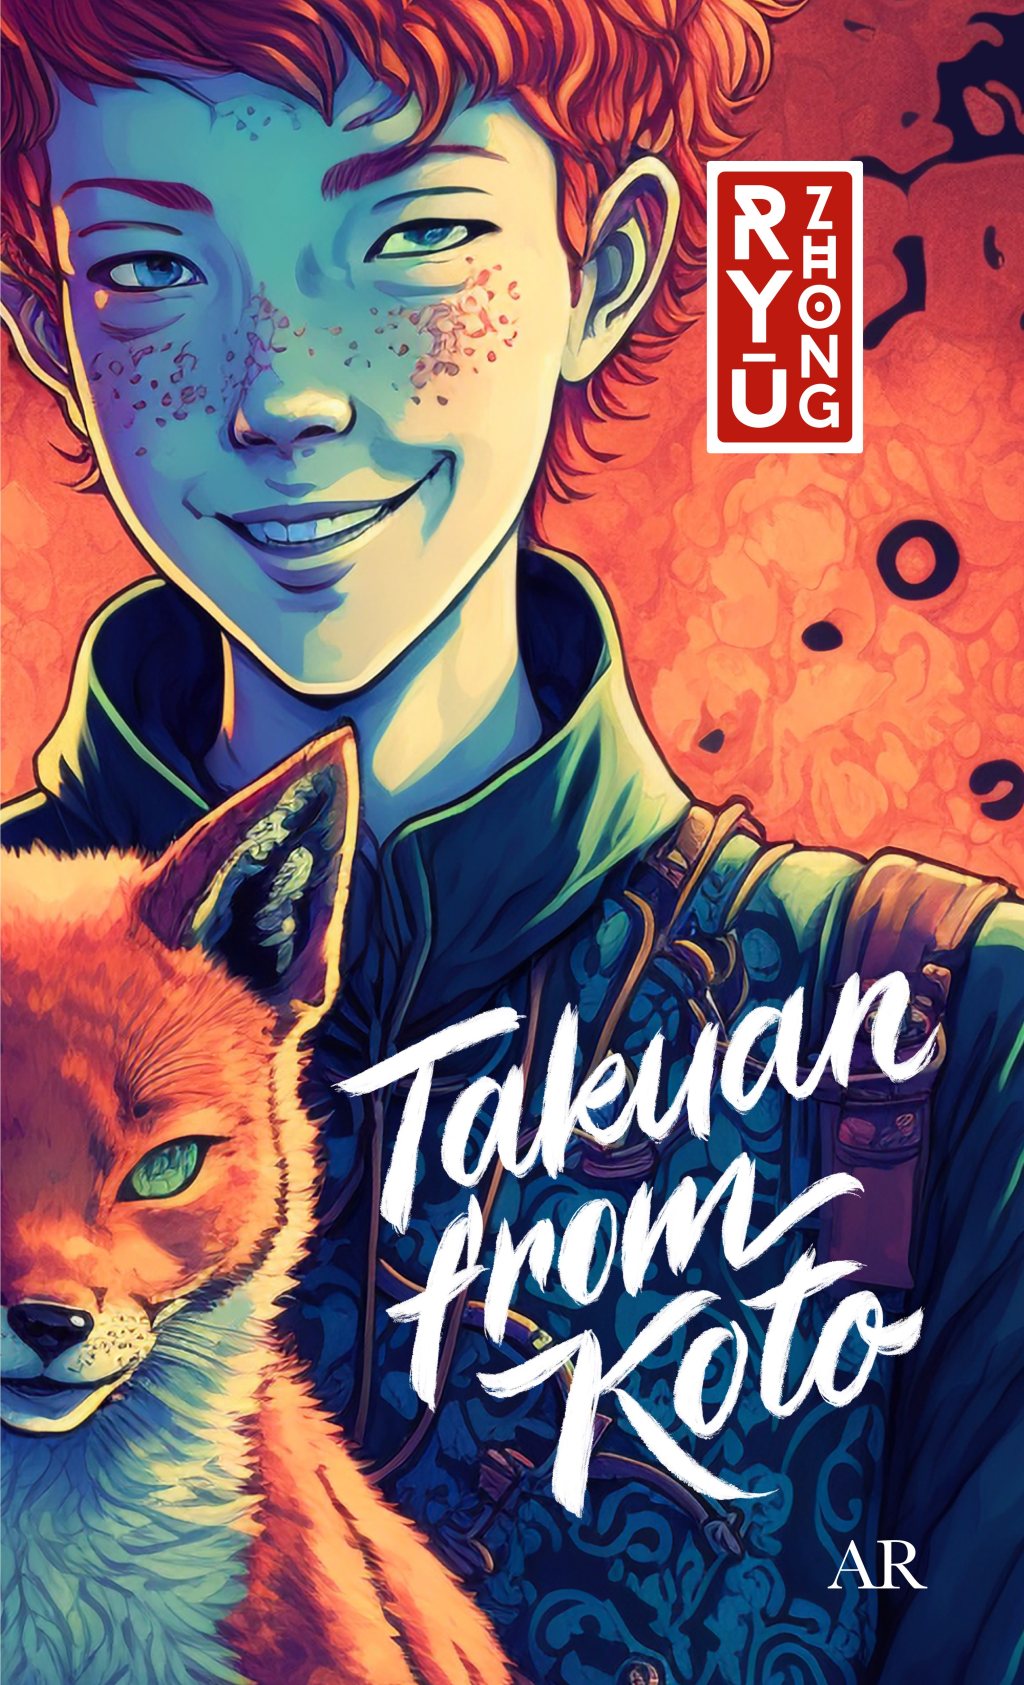 BOOK BLITZ: ADVENTURES OF TAKUAN FROM KOTO BY RYU ZHONG